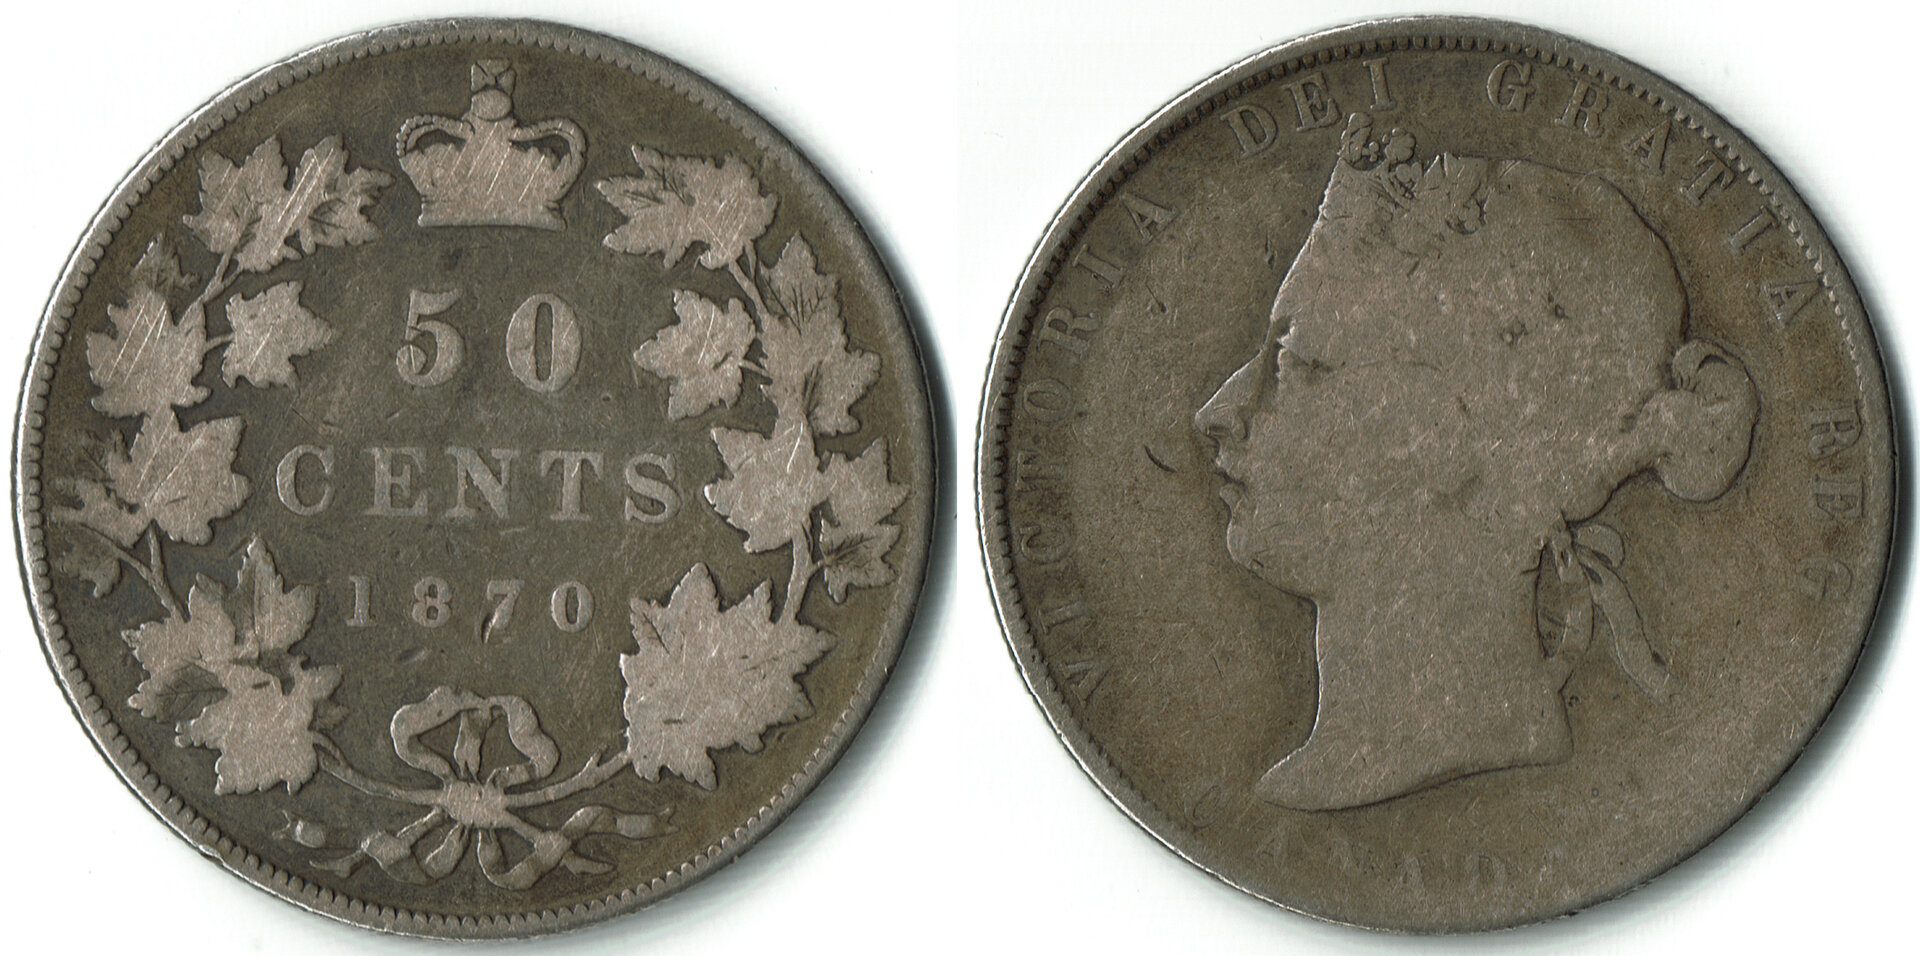 1870 Canada 50 Cents Combined.jpg